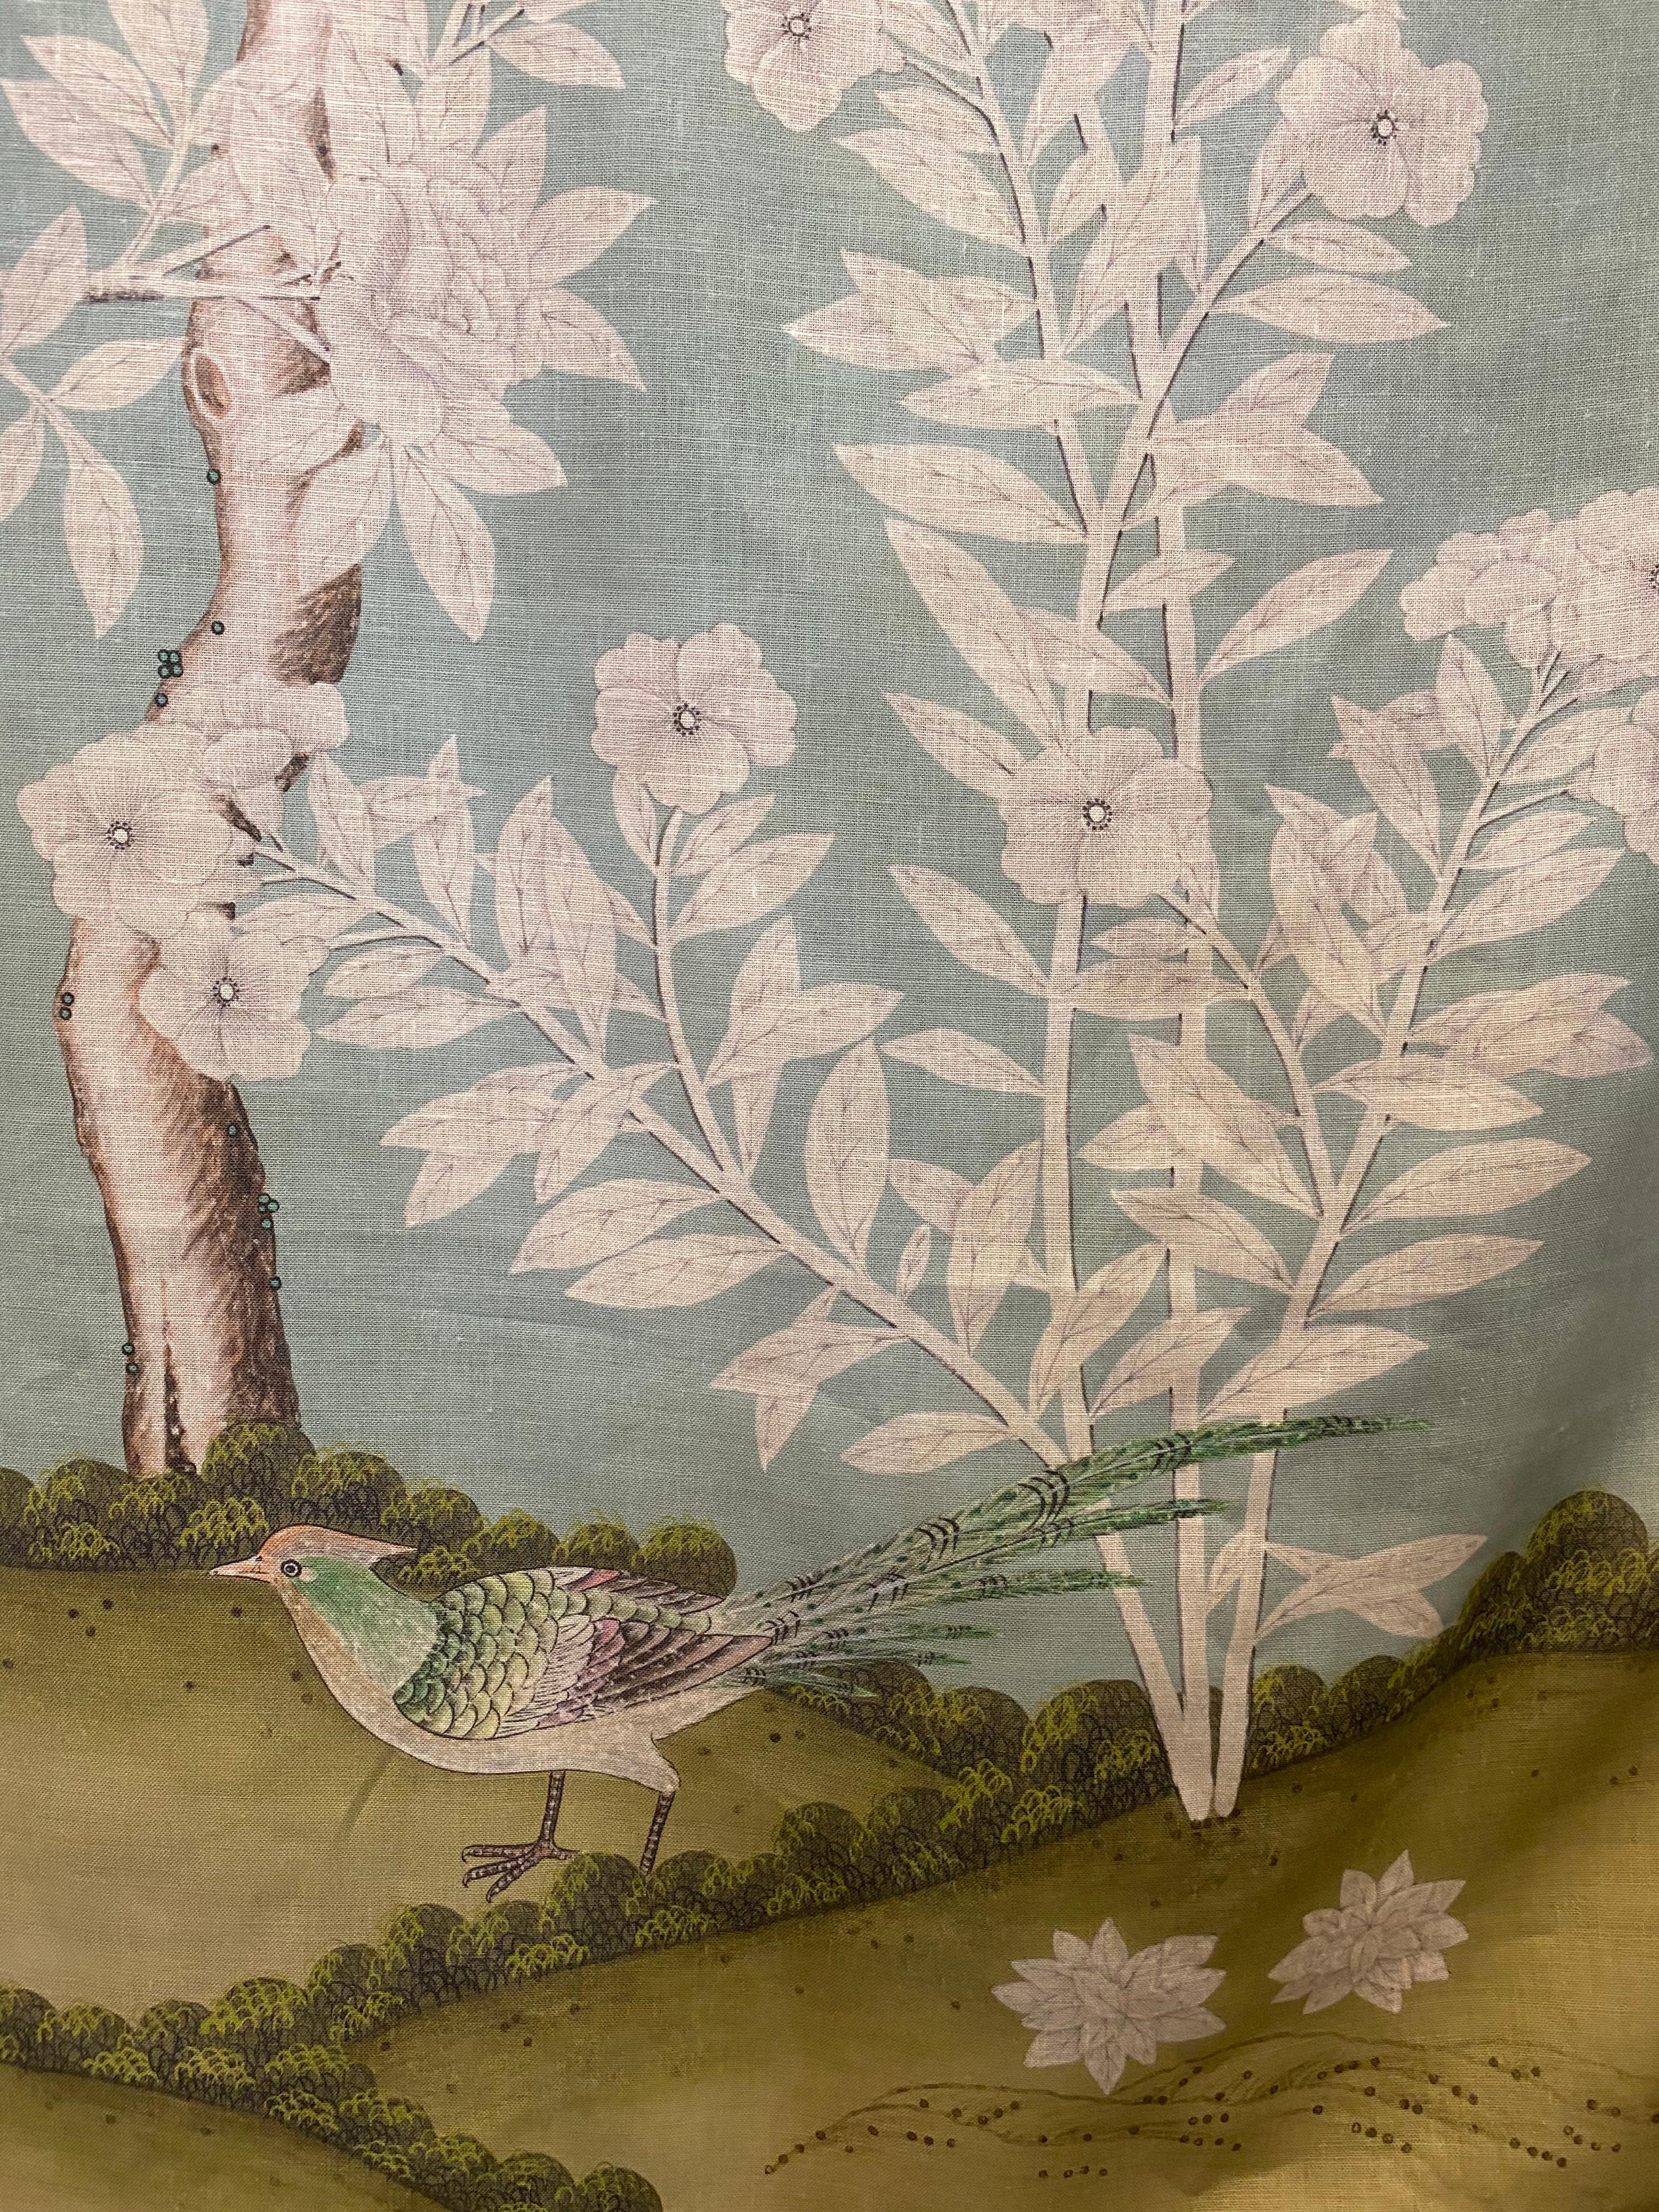 Gracie, the 5th generation firm established in 1898 and known for their exquisite hand painted wallpapers now has a line of linen fabrics featuring six of their iconic patterns.

This is Hampton Garden, with flowering trees, birds, and butterflies